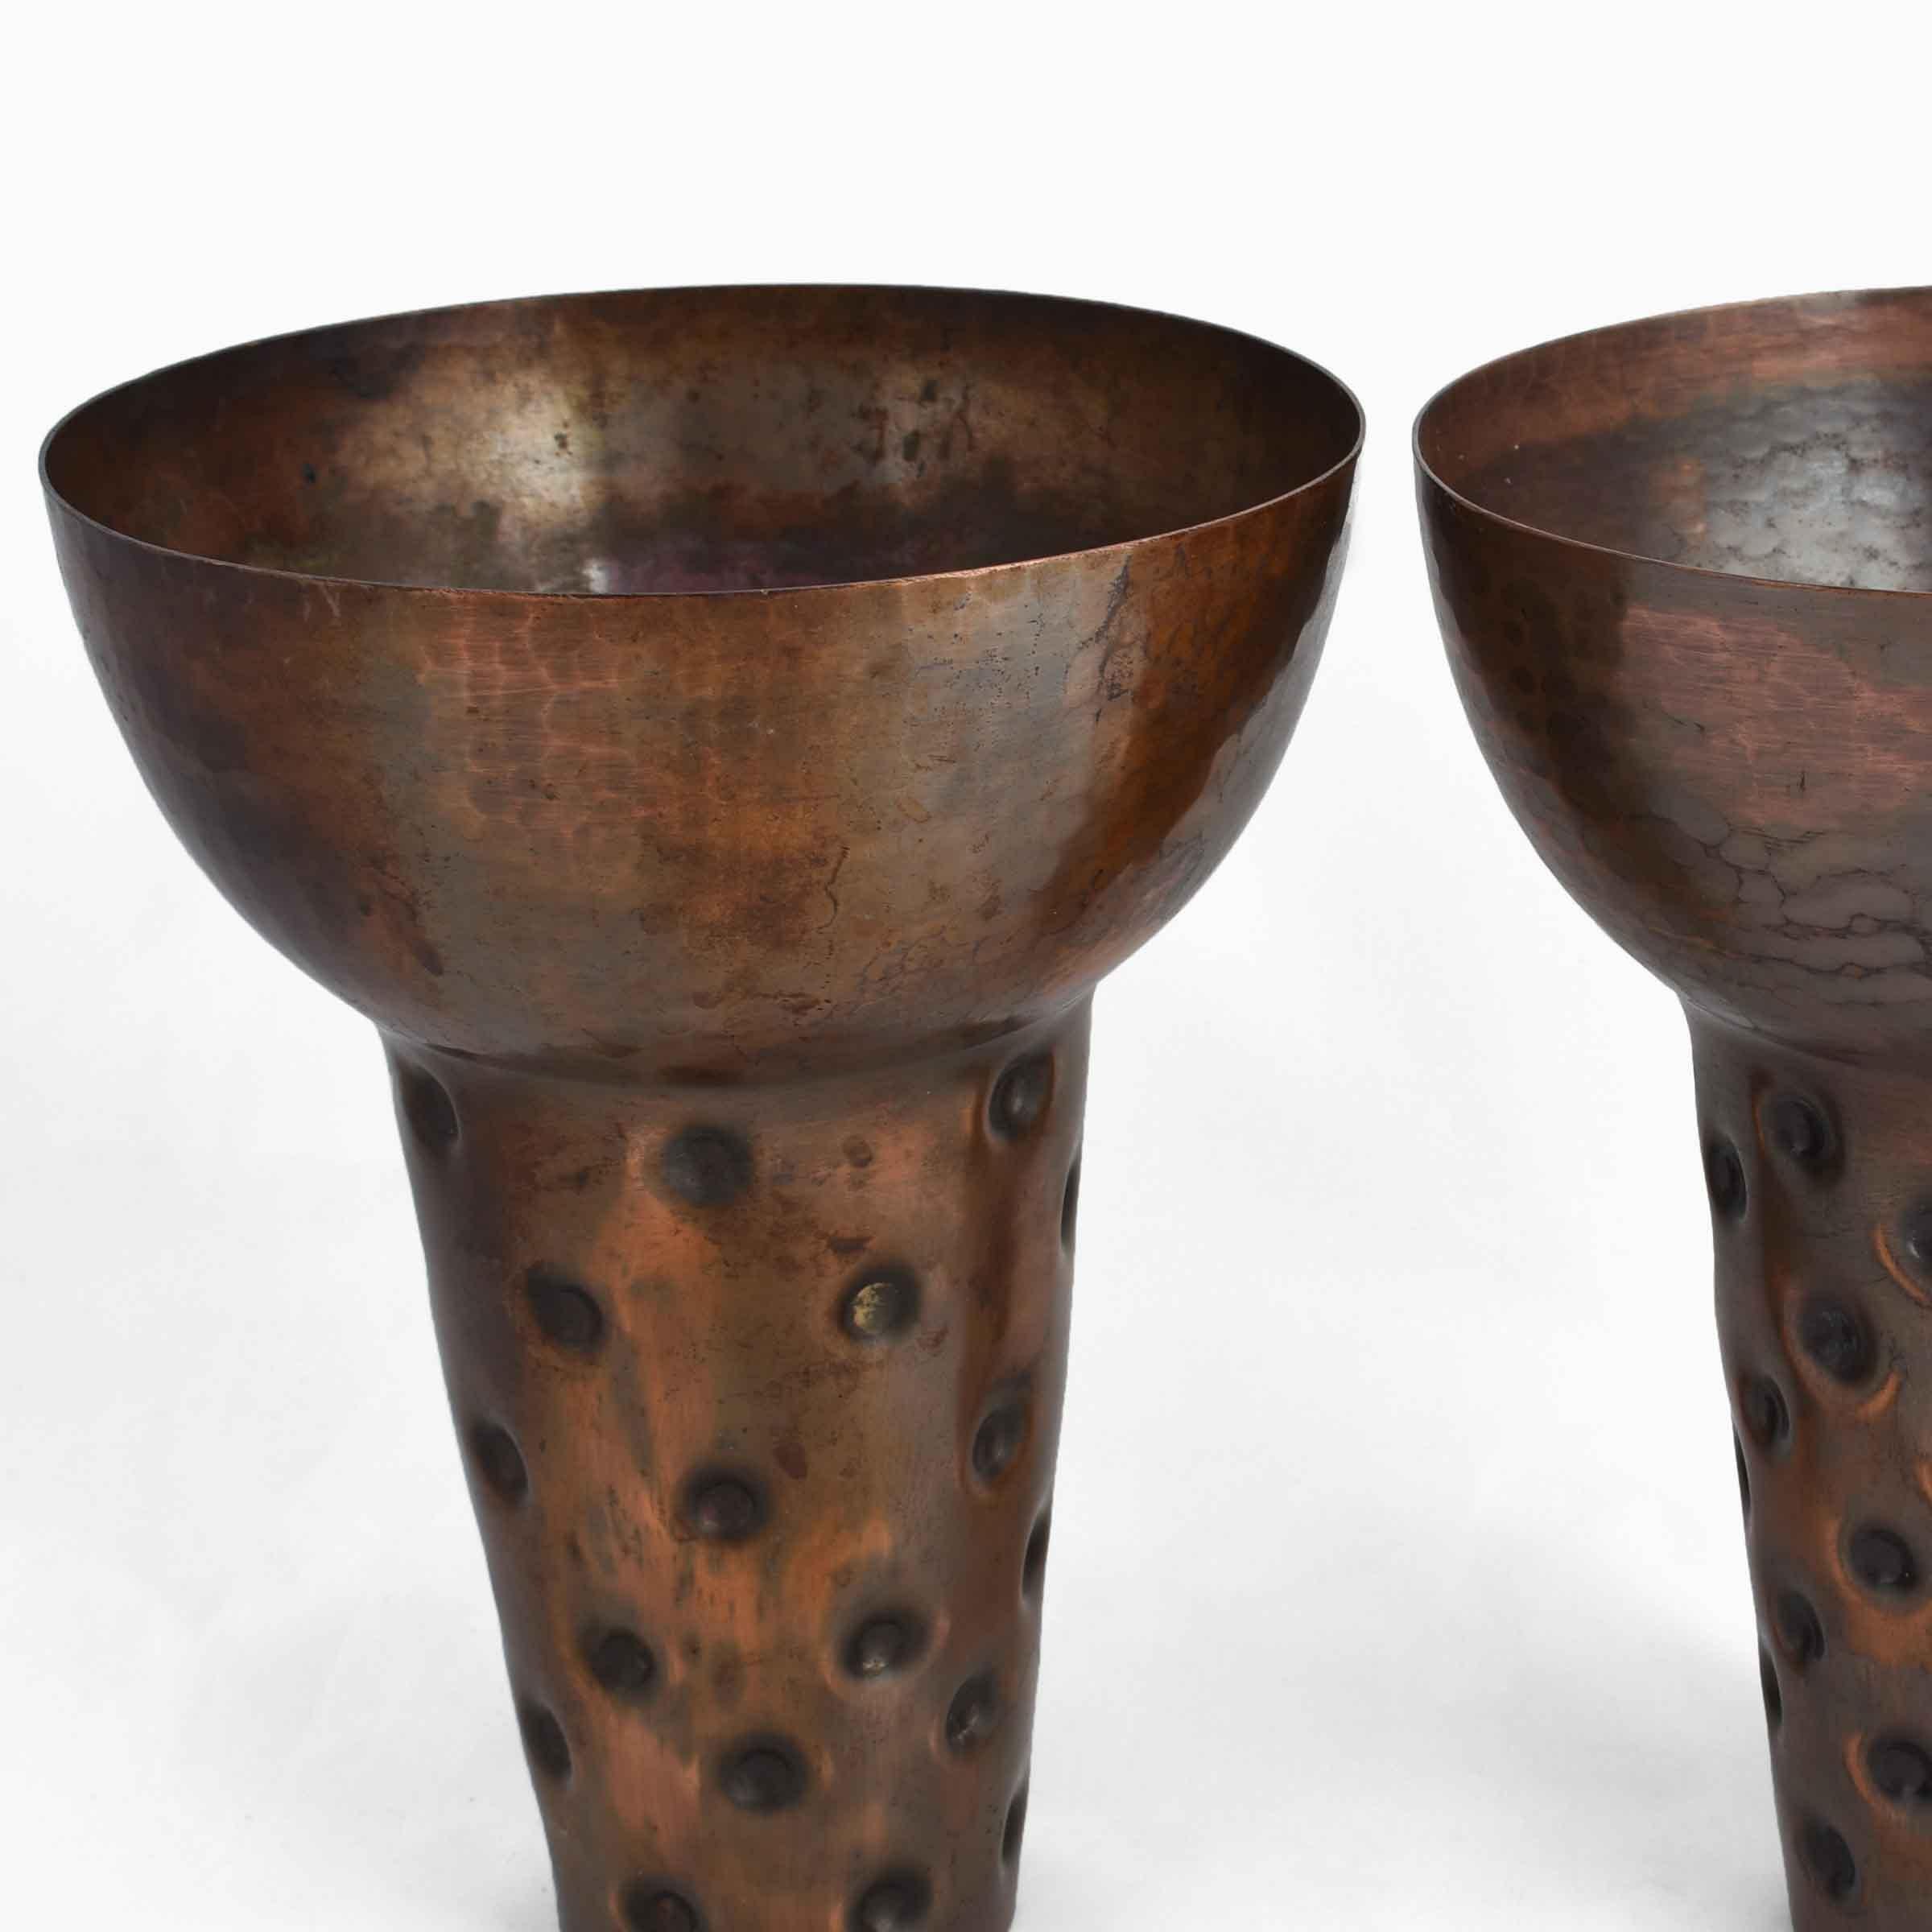 Pair of vintage copper vases is an original decorative object realized in Germany, circa 1950s.

Embodied copper objects.

Created by Eugen Zint. 

